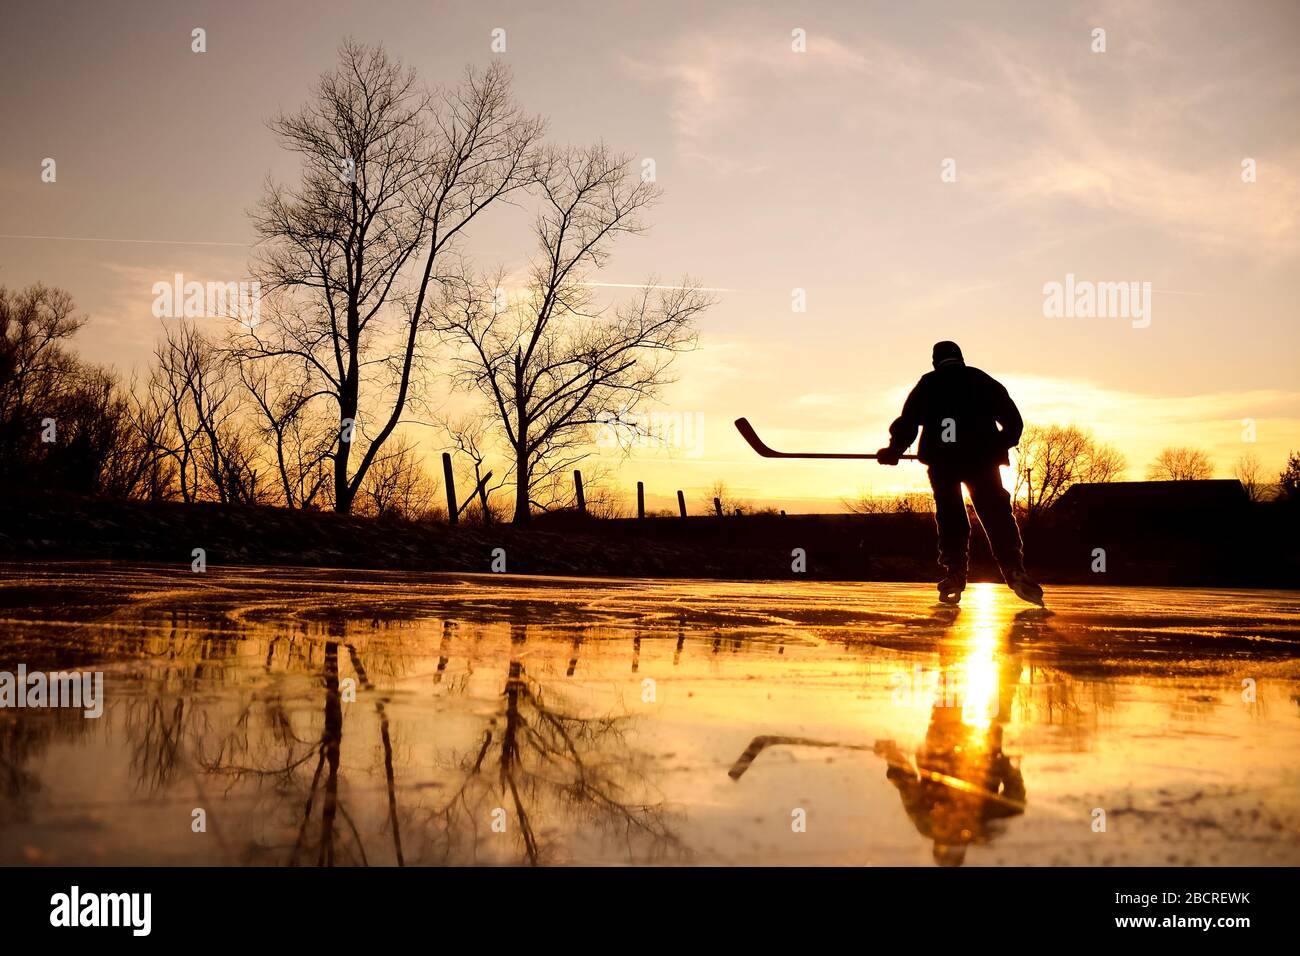 Reflexion of young hockey player on bright natural ice during colorful calm winter sunset on january frozen lake Stock Photo